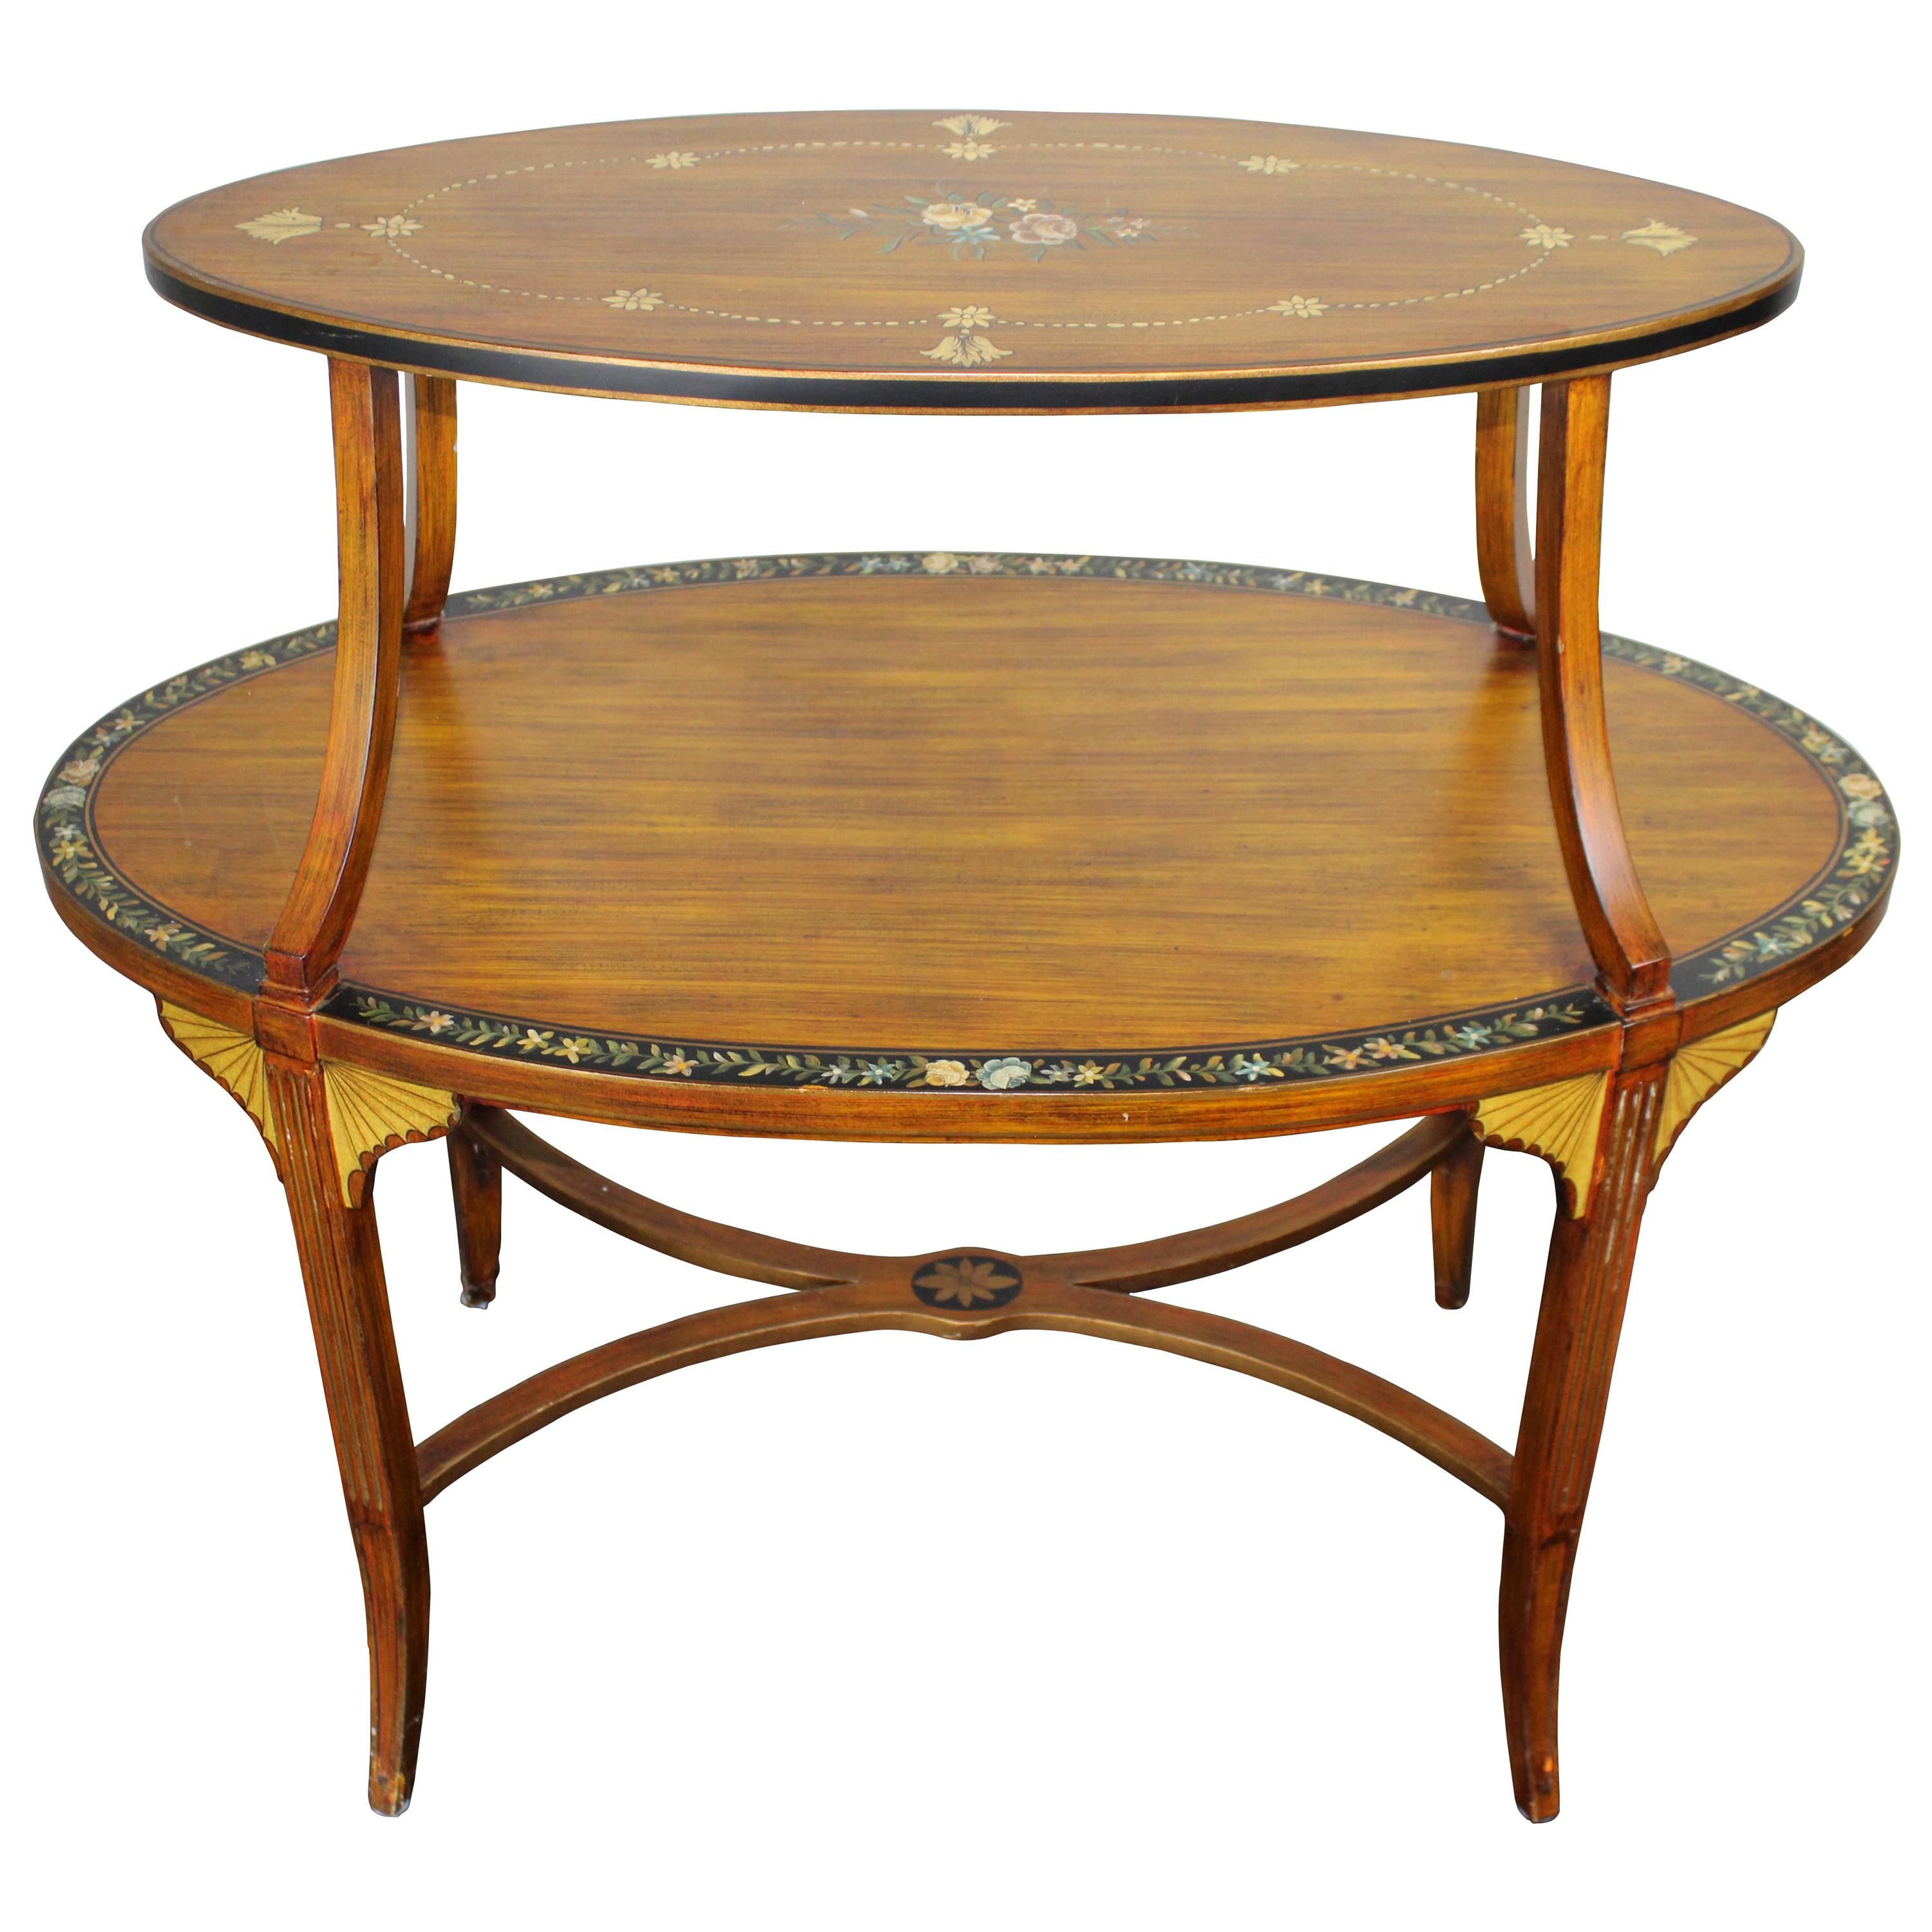 Sarreid Edwardian Oval Tray Top Étagère Table Sheraton Revival Floral Painted 35 For Sale